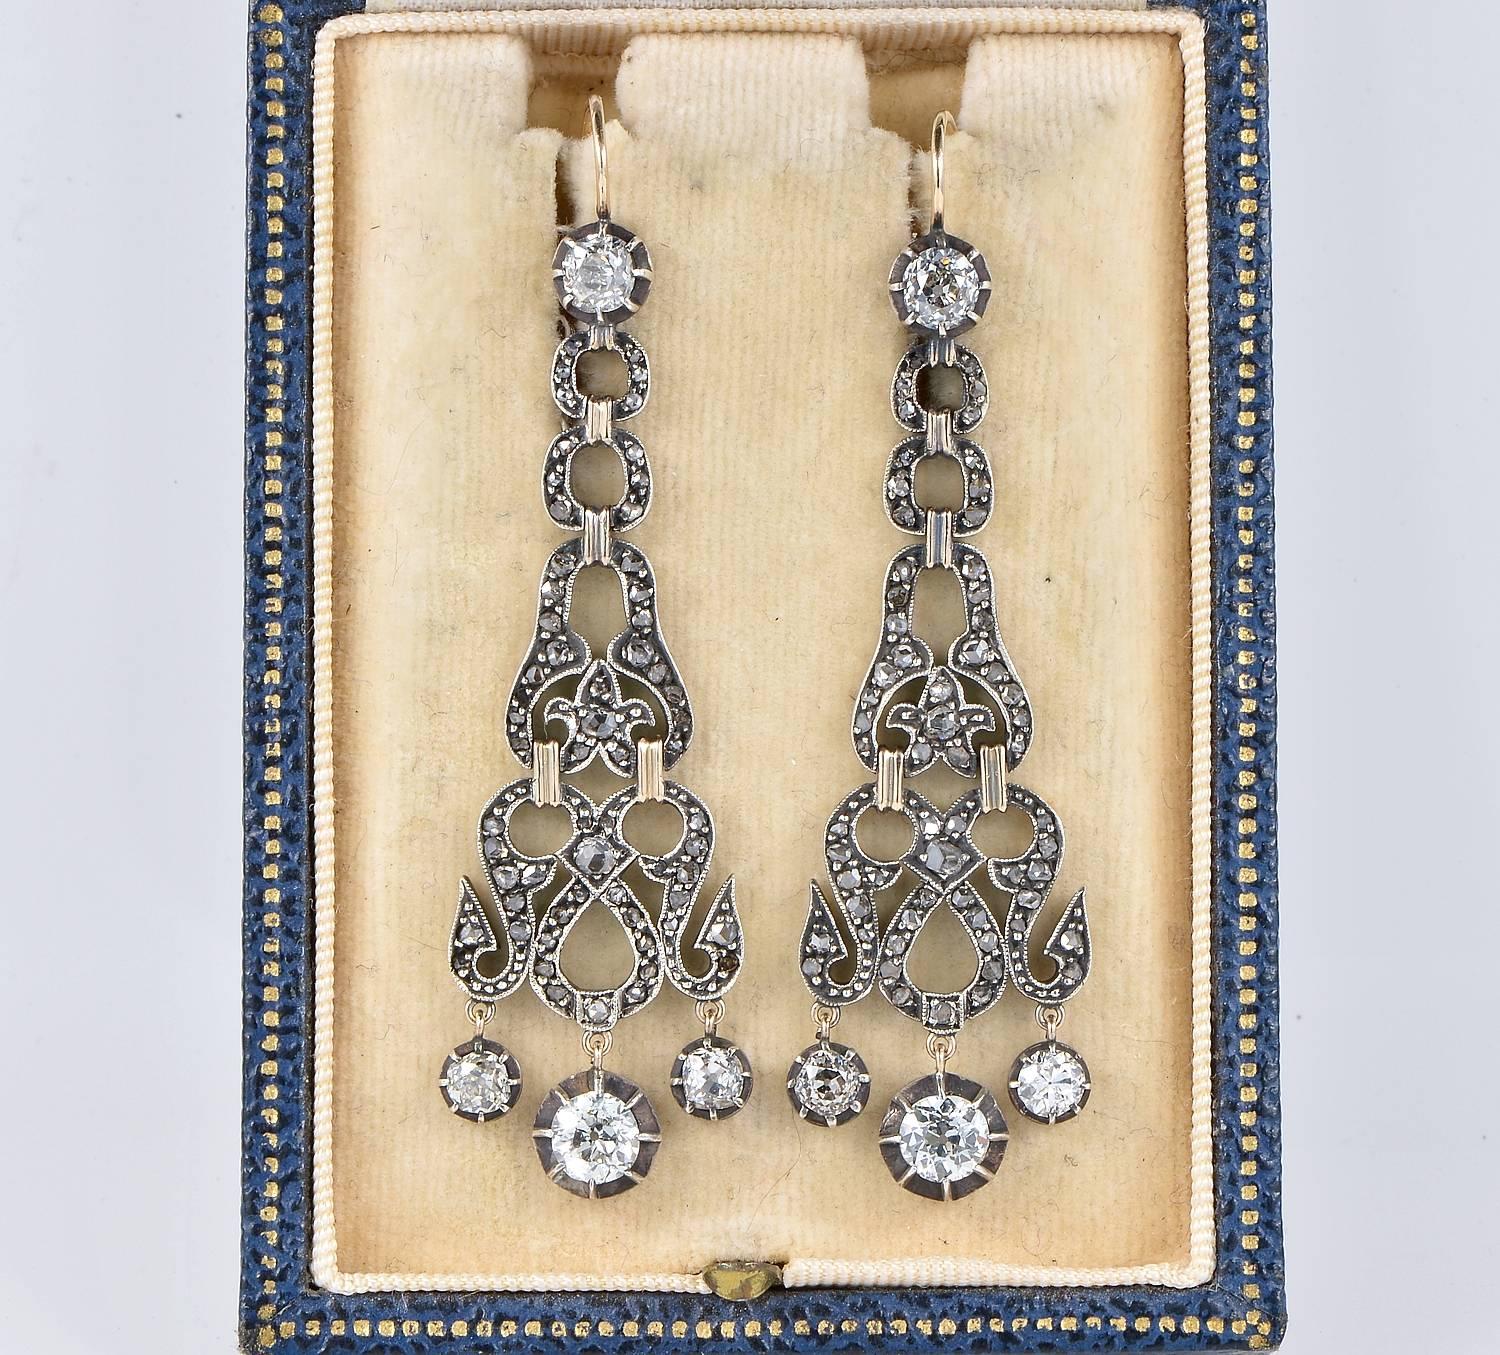 Top notch authentic Empire period long drop earrings. 
Rare and beautiful pair to get in any collection. 
Hand crafted during the period of solid 18 KT gold with topped by silver - not marked.
Fantastic interlaced panel work totally surmounted by